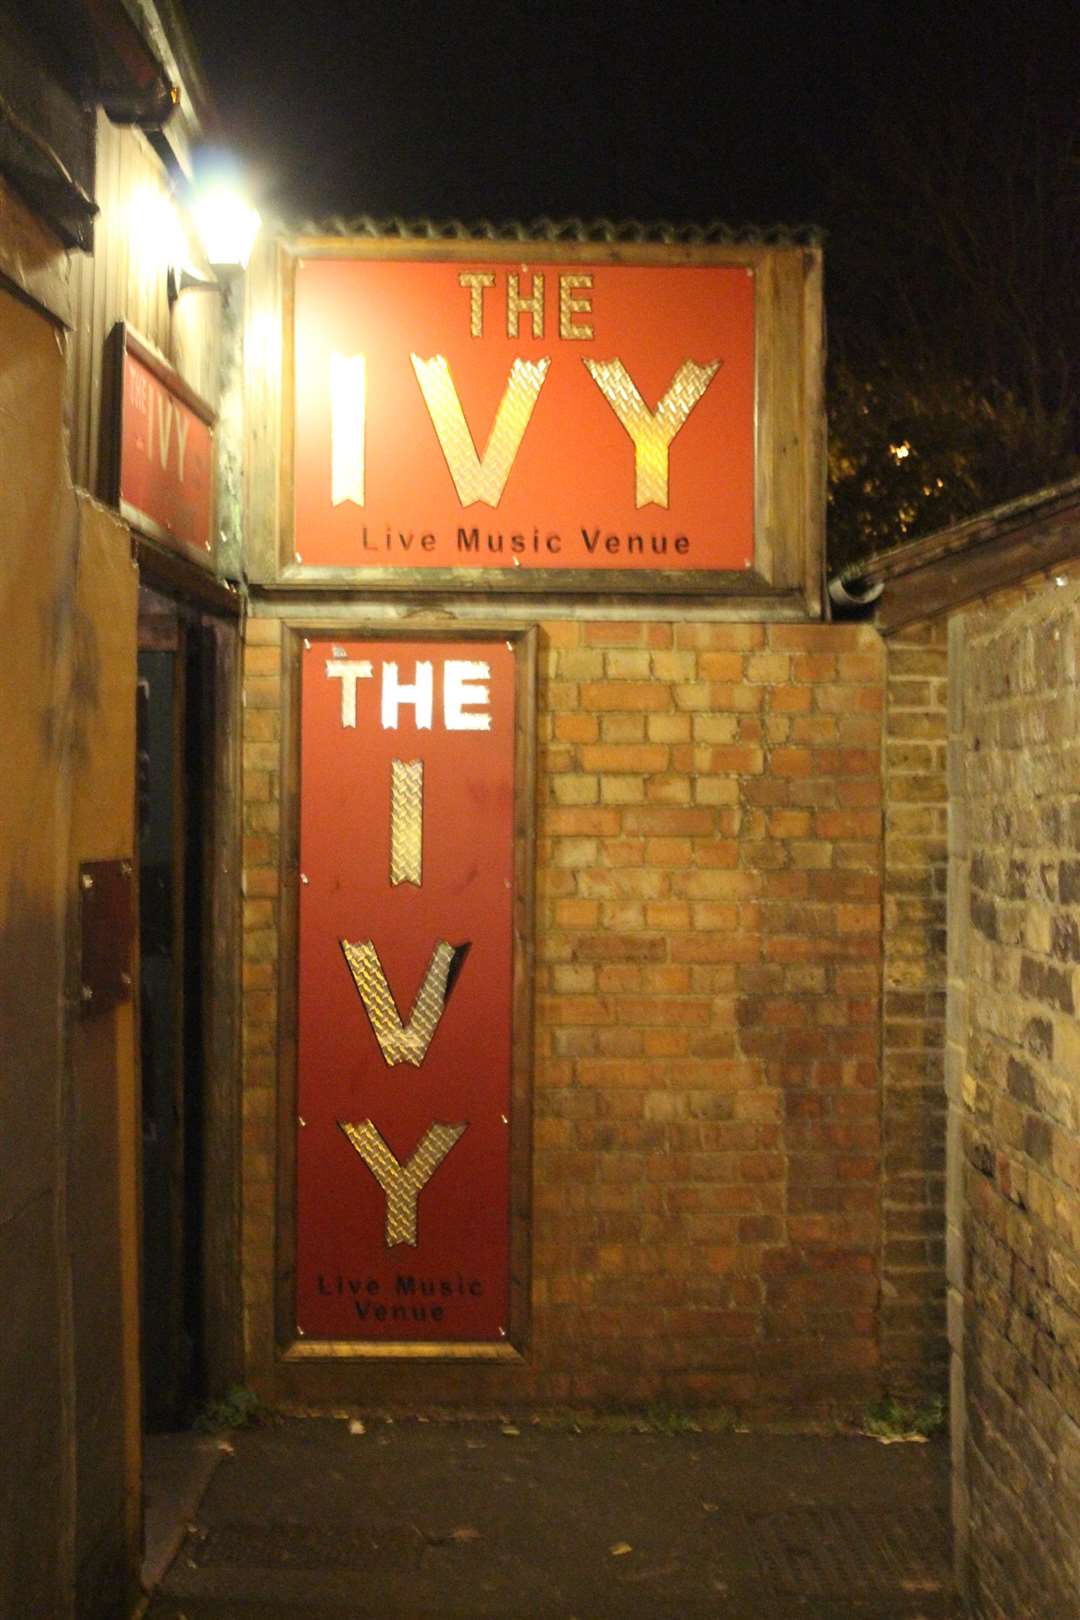 The Ivy at Sheerness: the start of great things for Ben Bowman's Michael Jackson career